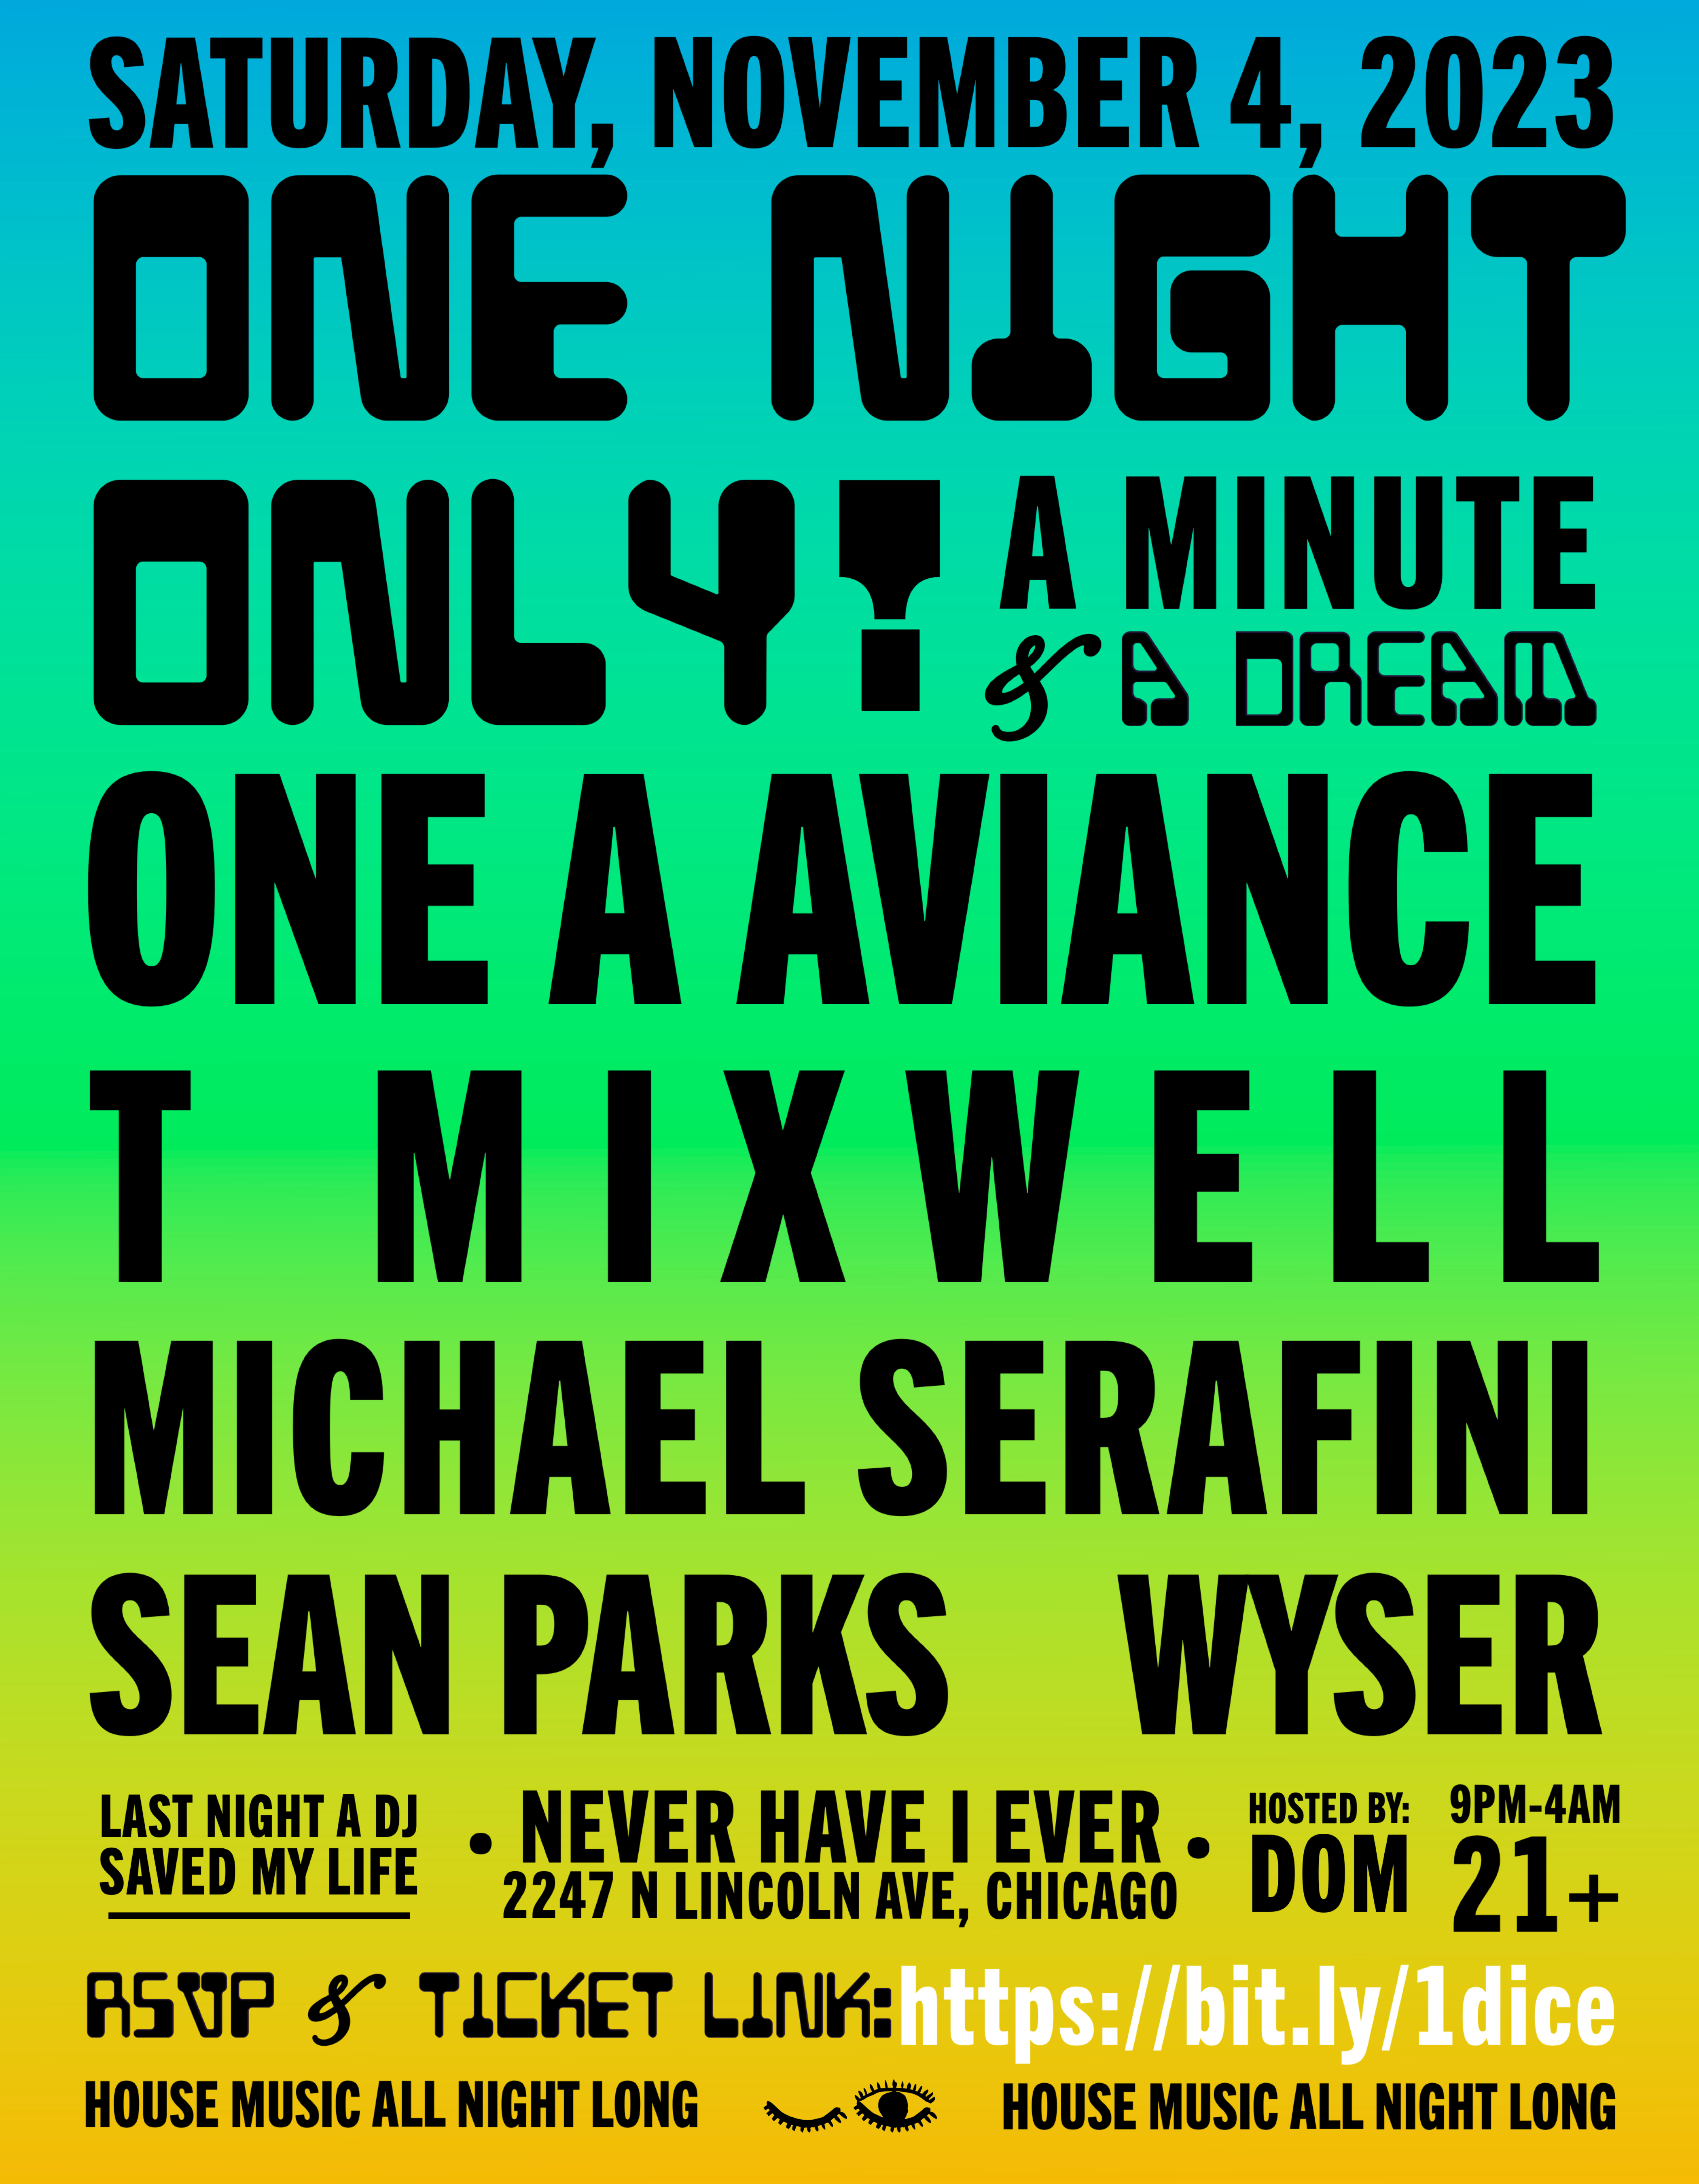 One Night Only! - 1A Aviance, T Mixwell, Michael Serafini, Sean Parks, Wyser - フライヤー表